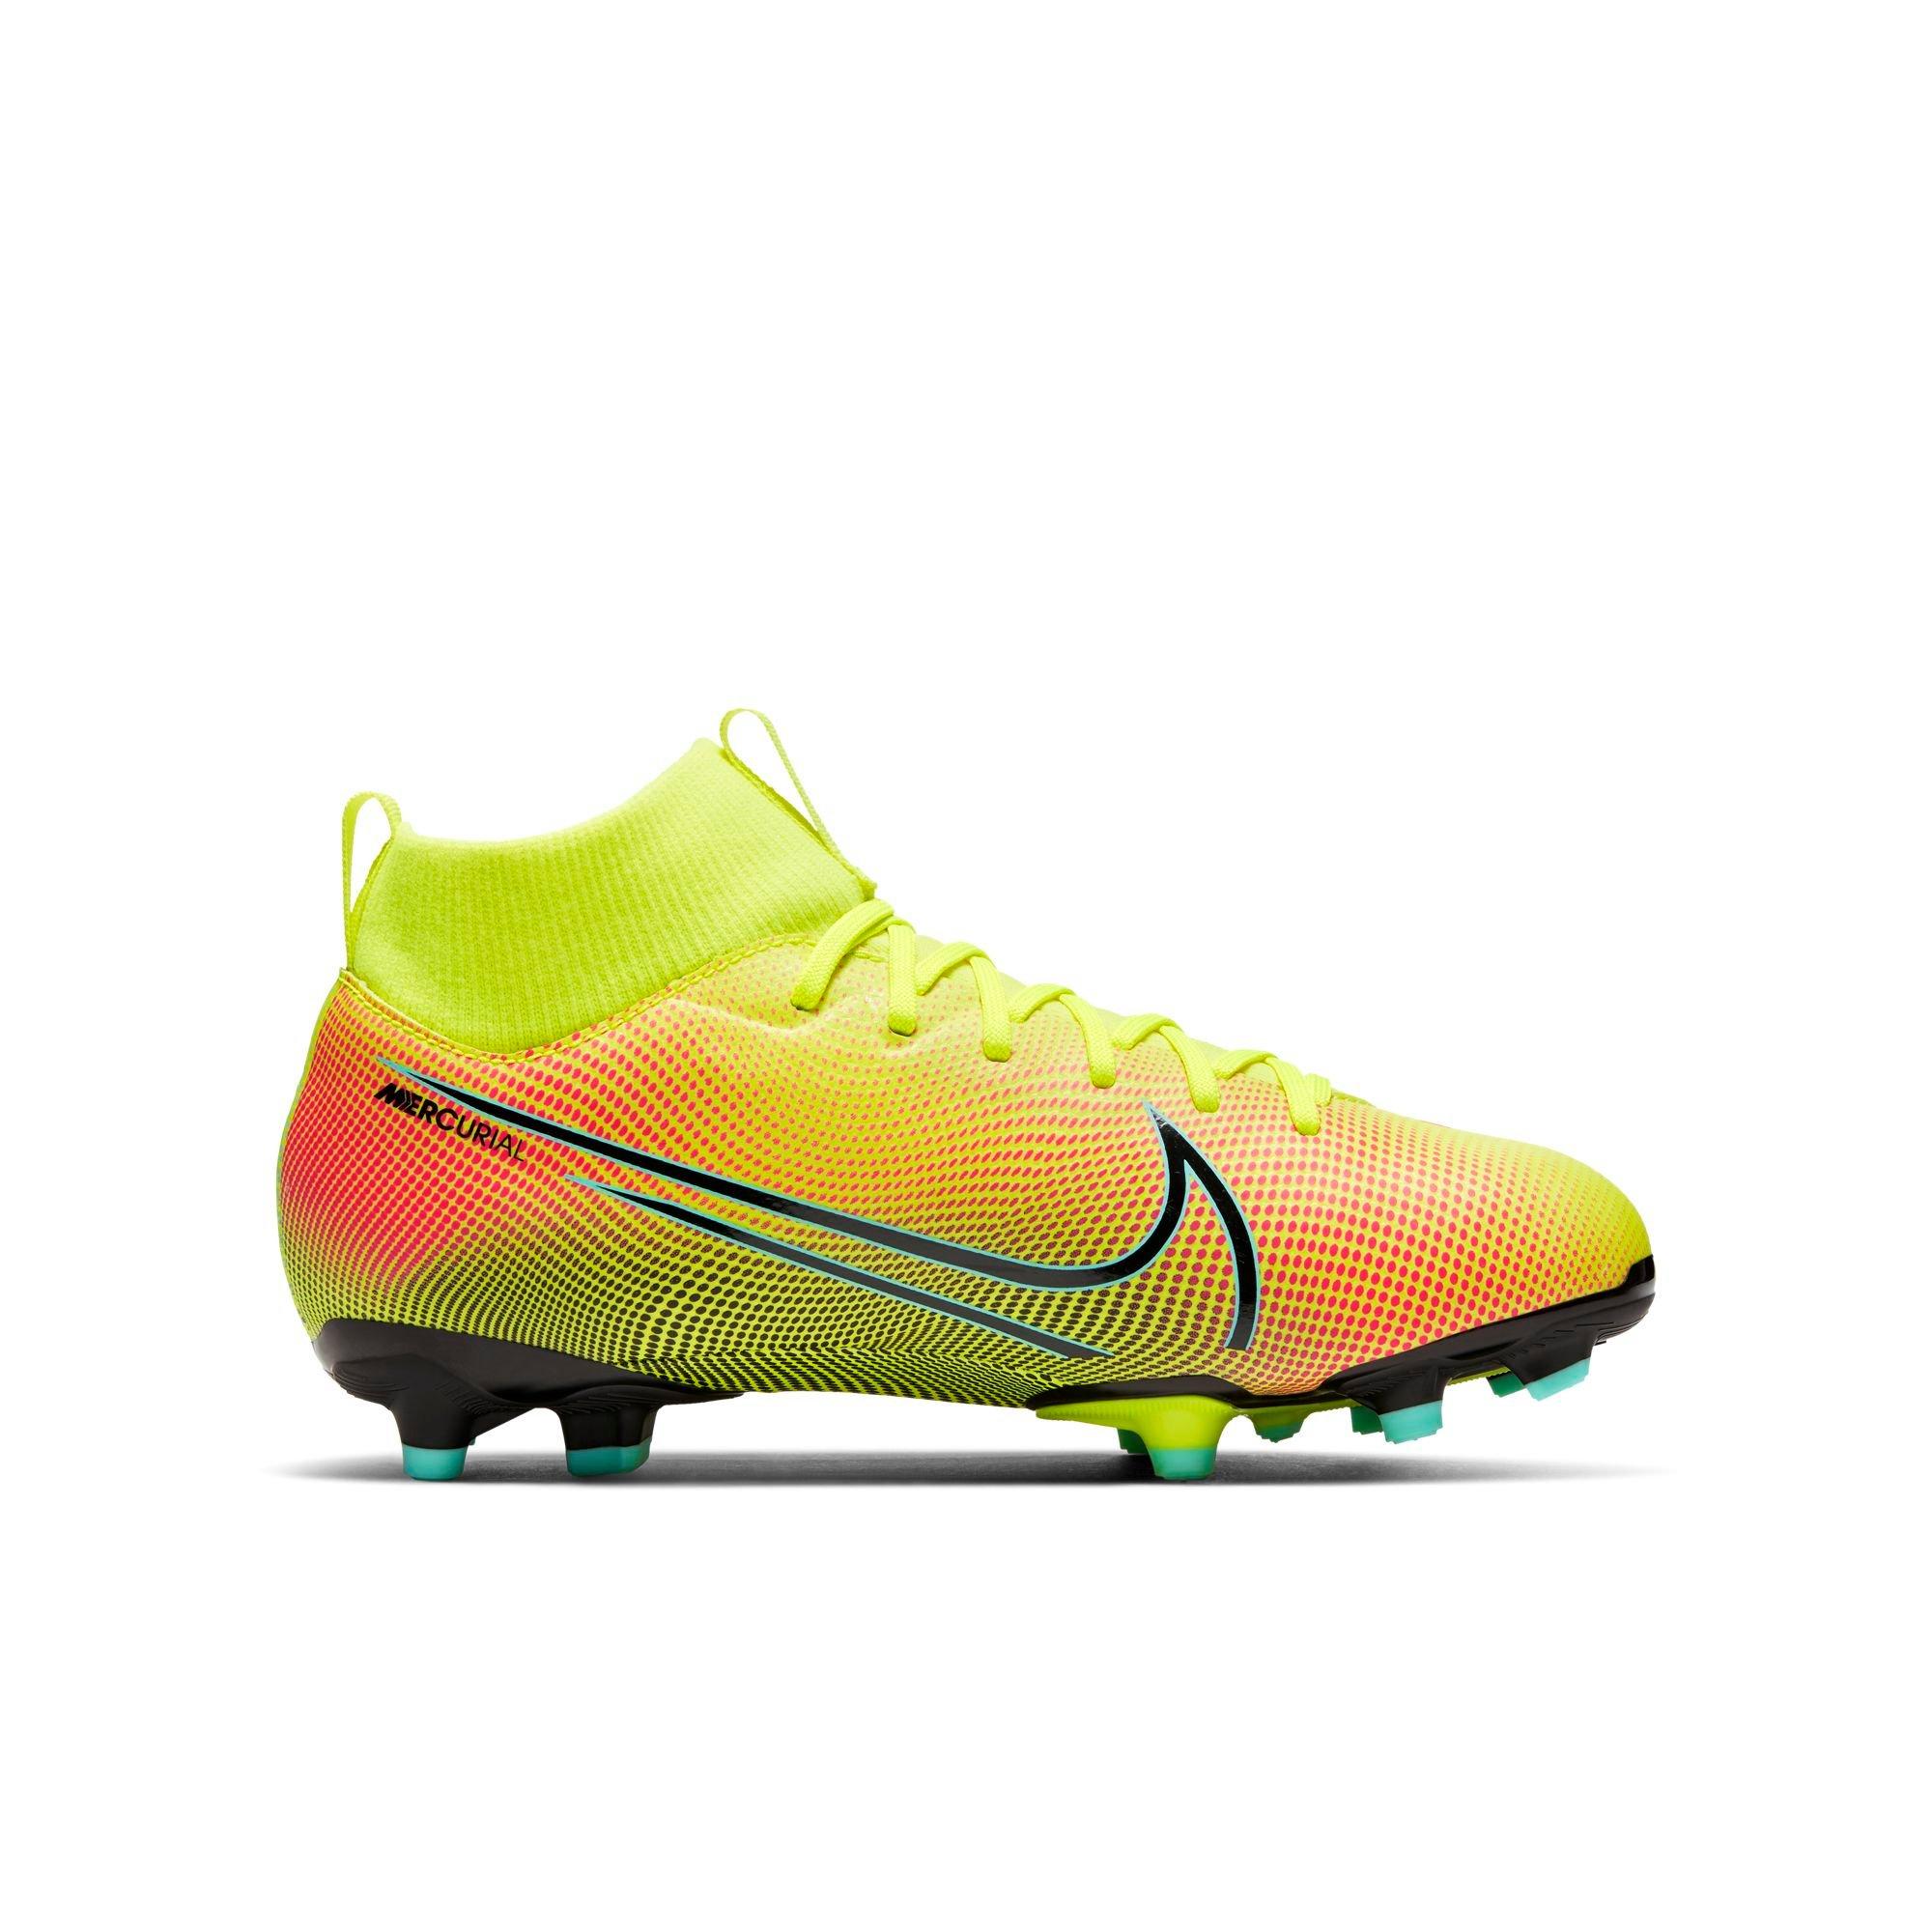 youth boys soccer shoes